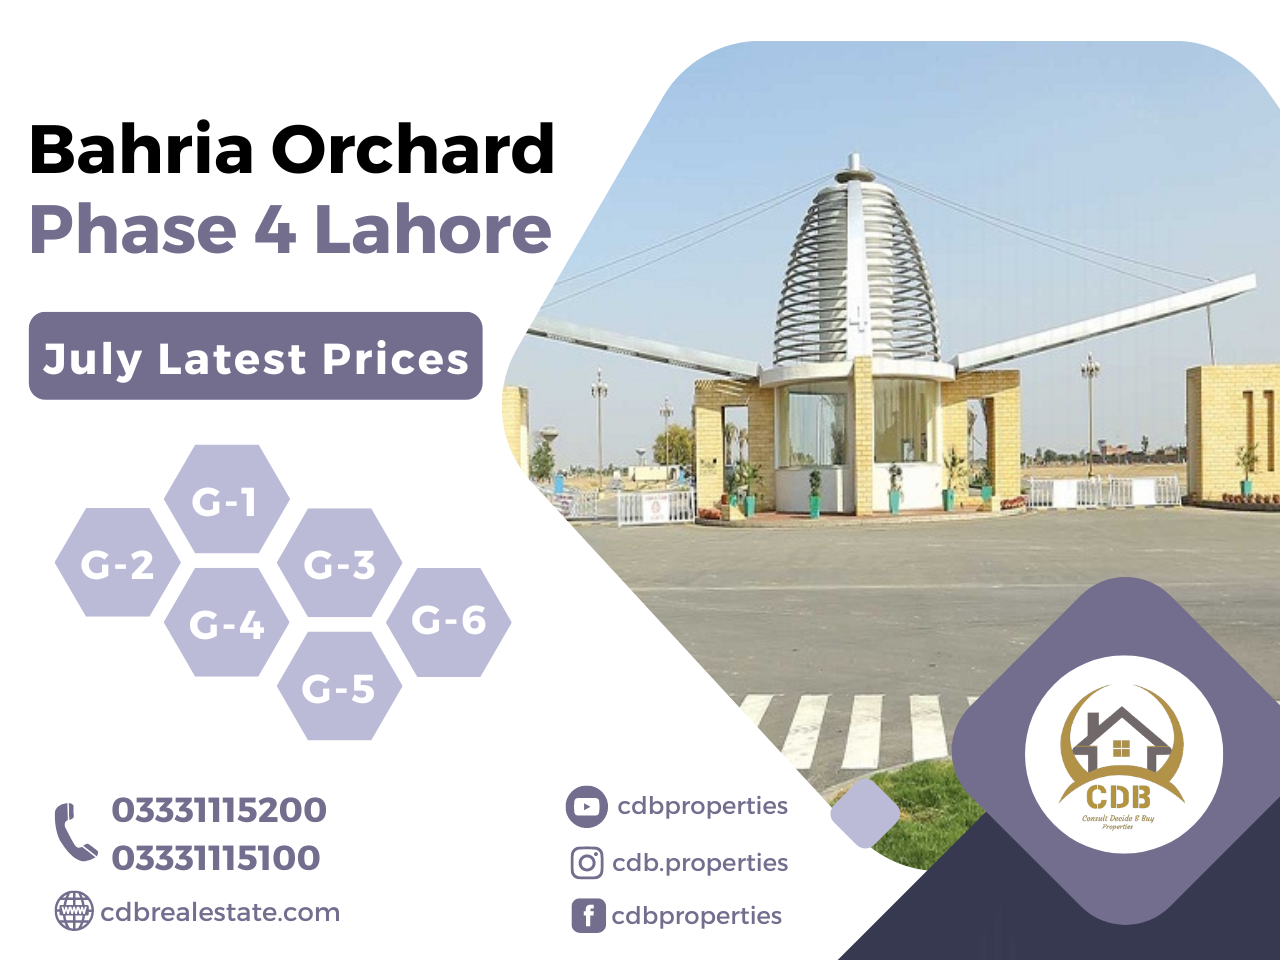 Bahria Orchard Lahore Phase 4 July Latest Prices